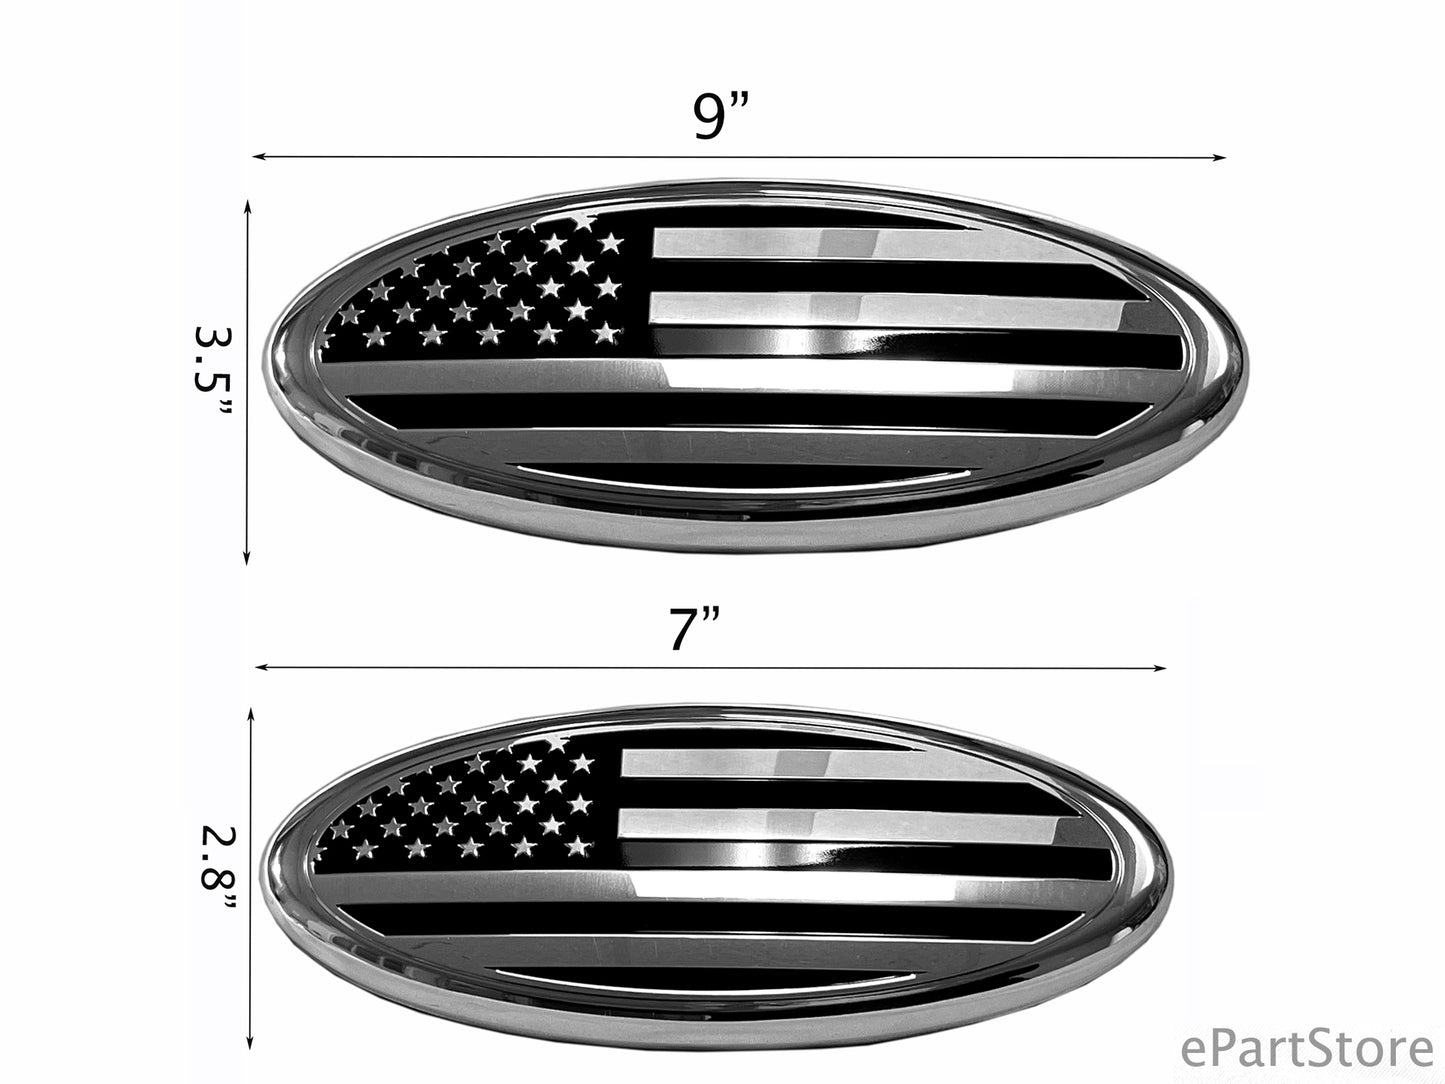 American Black and Chrome Flag Emblem, 7" and 9" Oval Decal Badge Nameplate for Ford F150 F250 F350